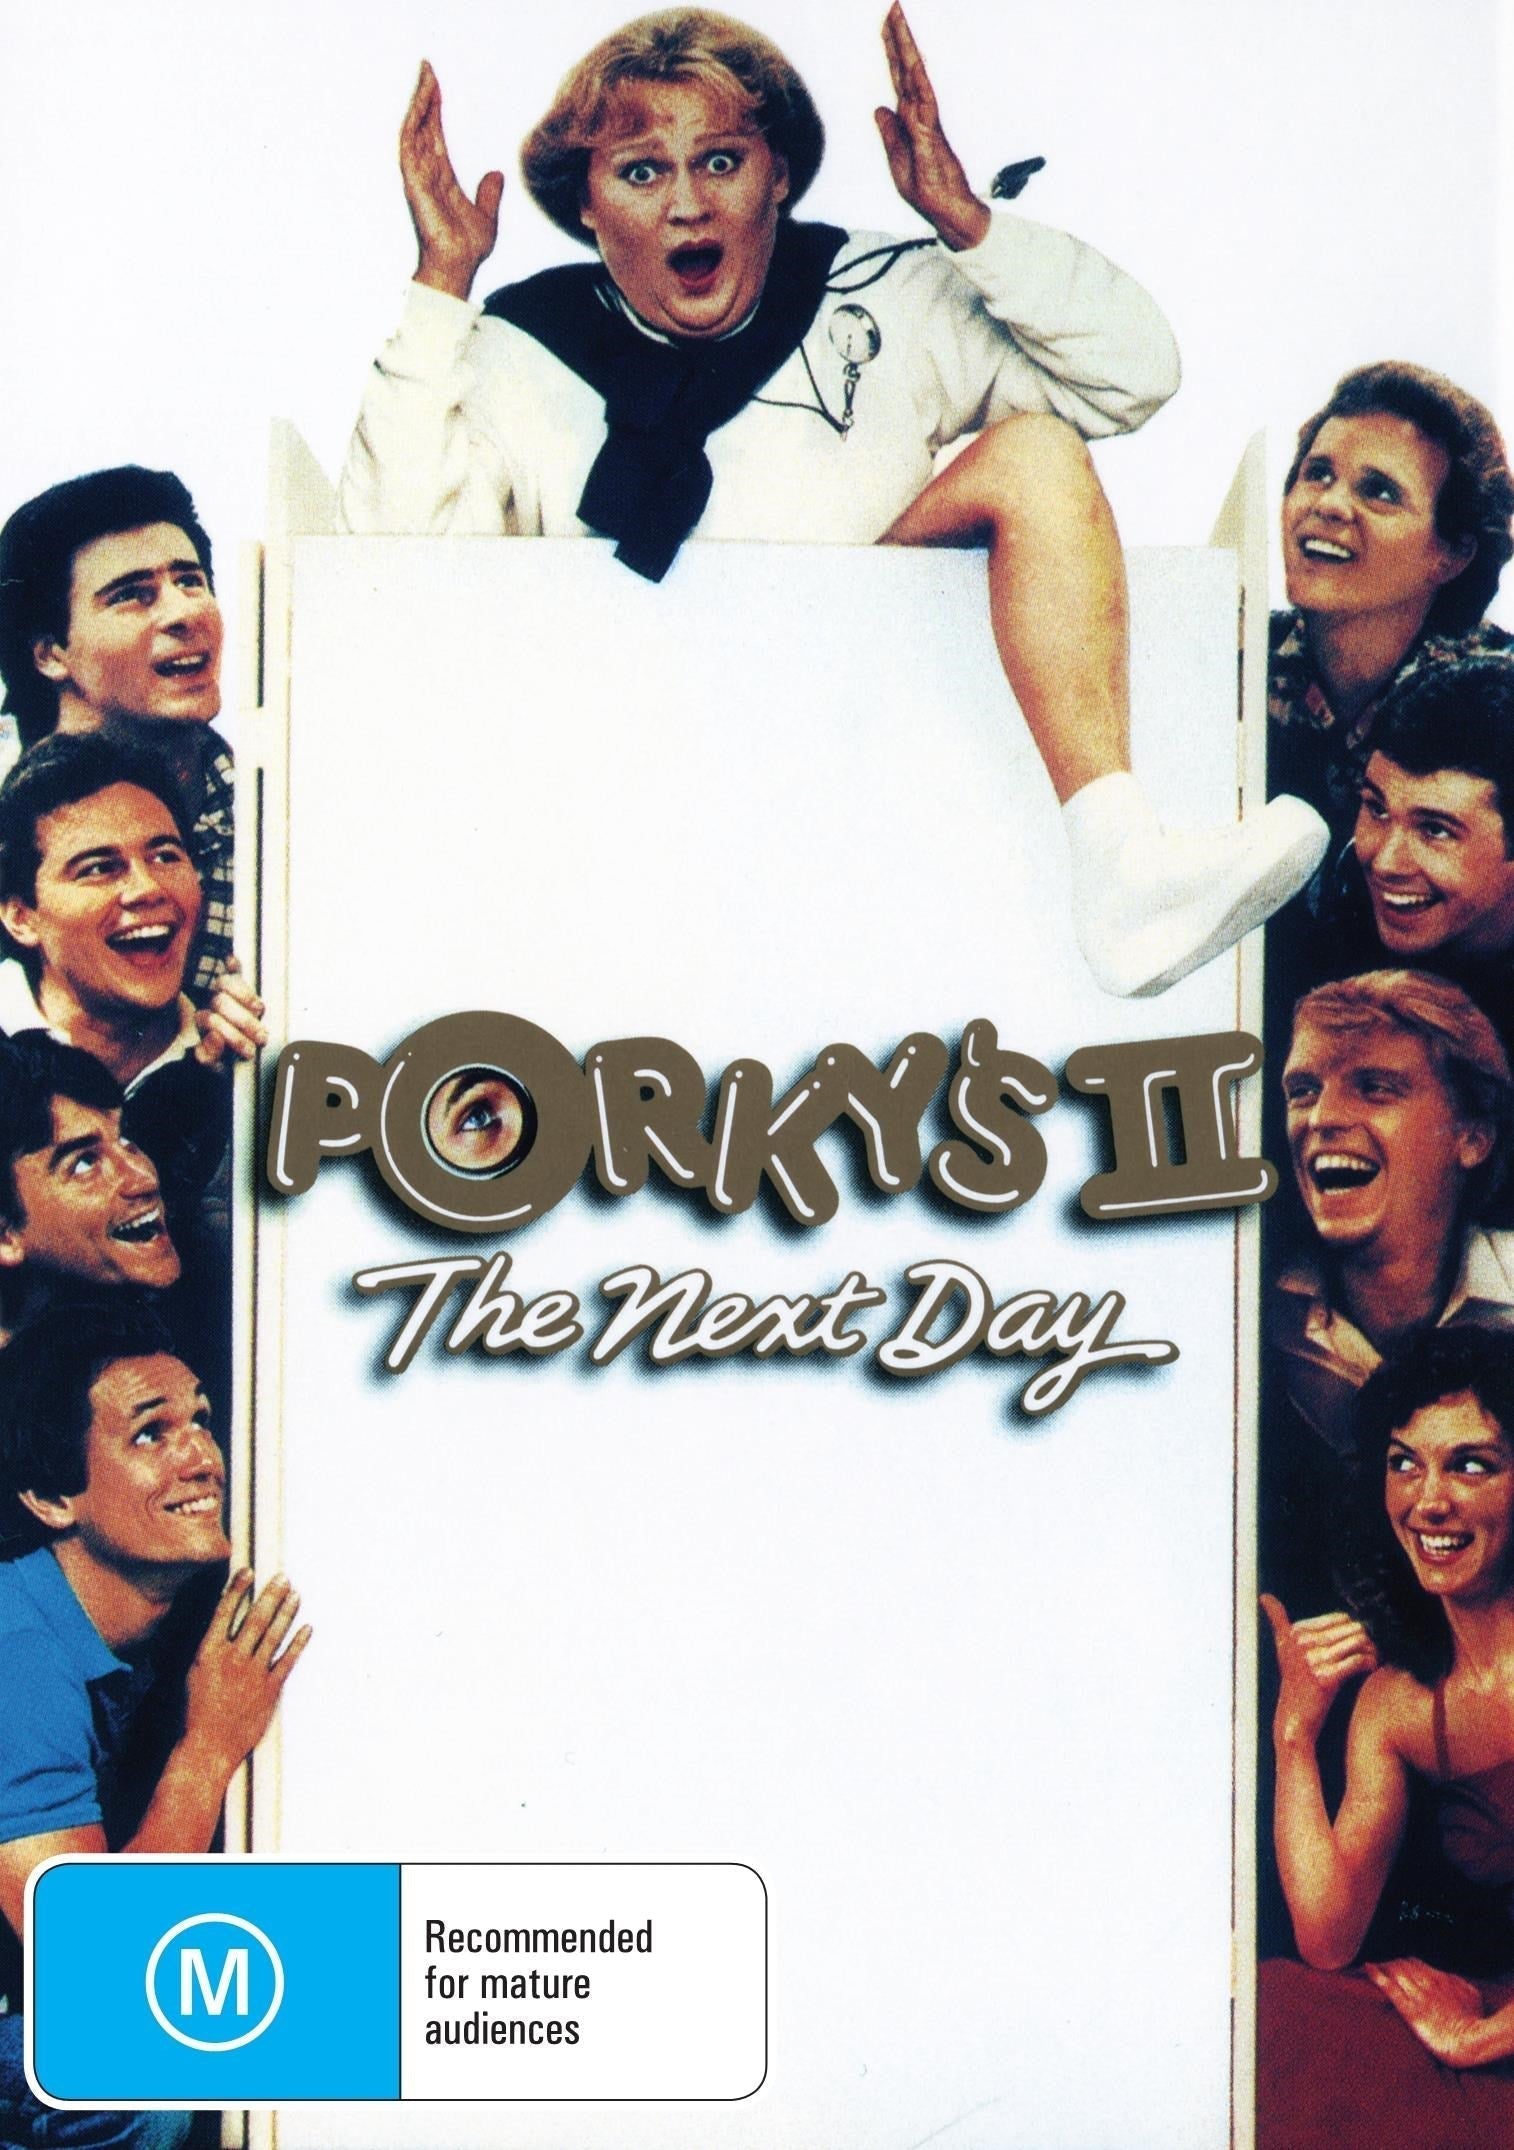 Porky's II  The Next Day rareandcollectibledvds